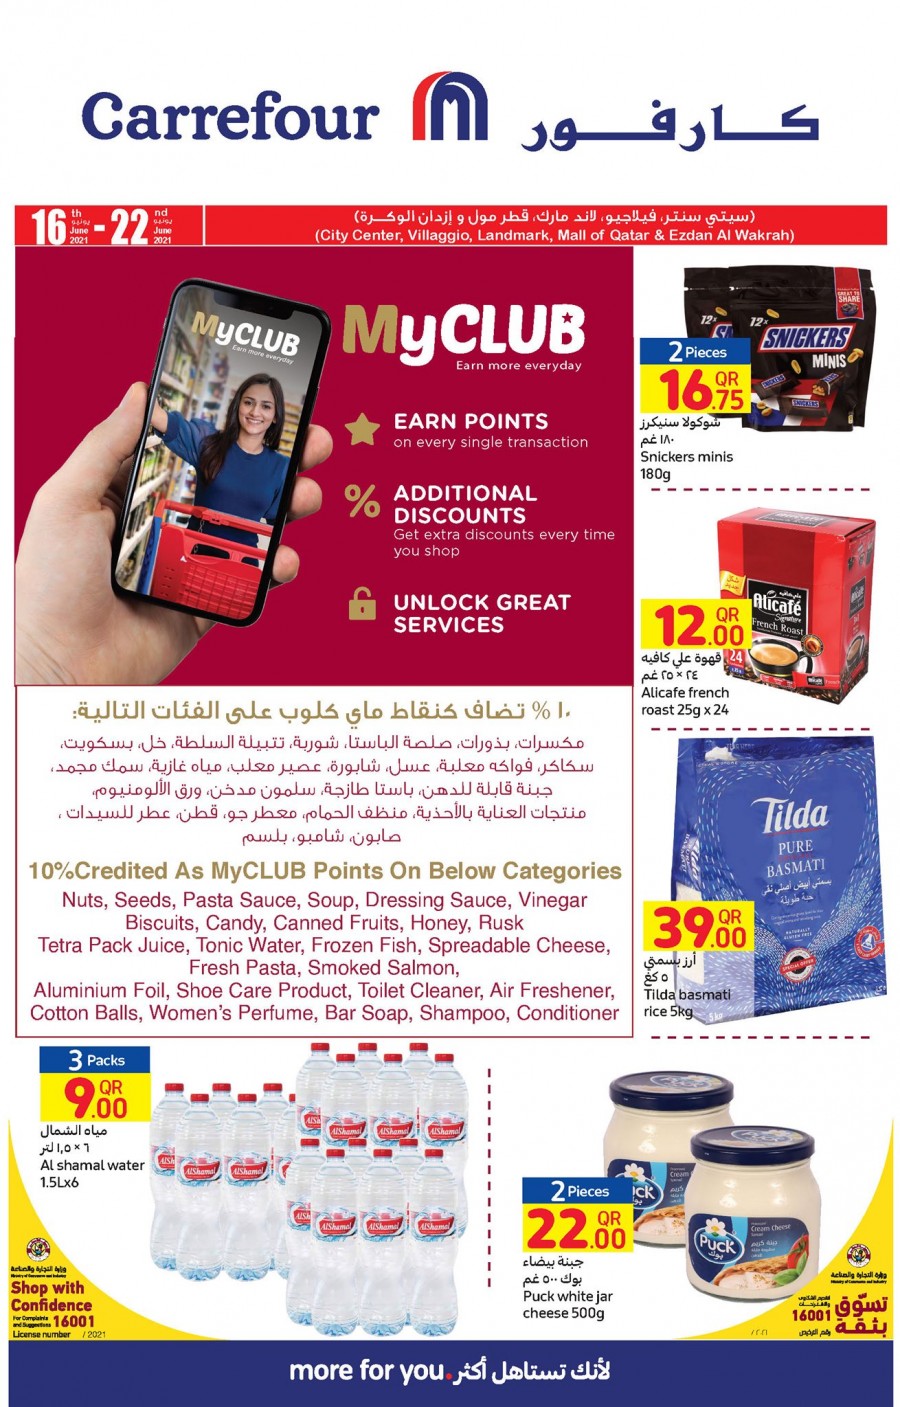 Carrefour Grand Promotion